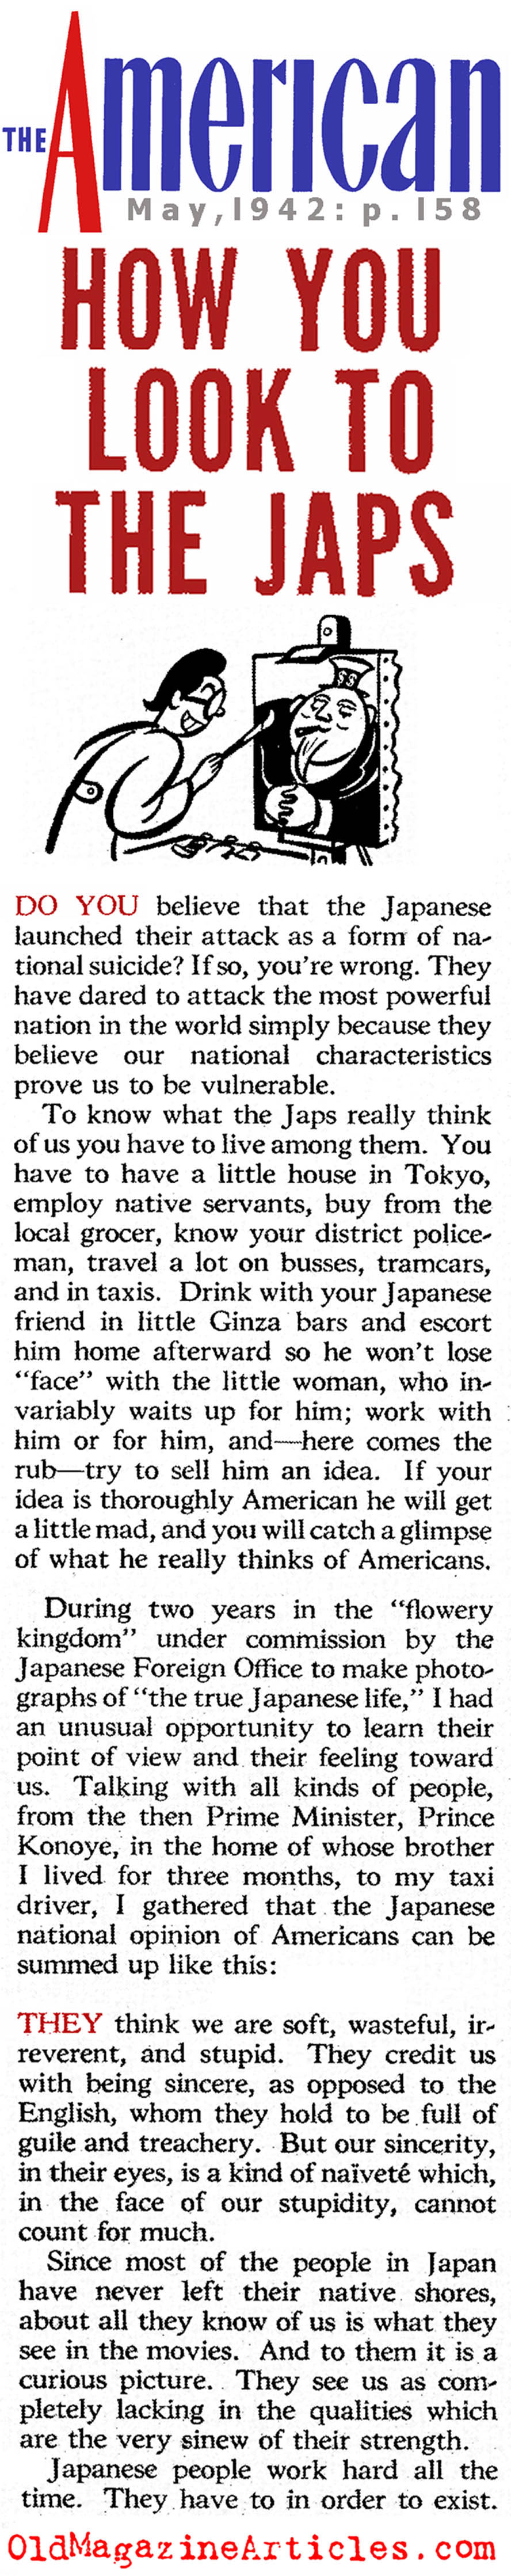 How Americans Were Seen by The Japanese (American Magazine, 1942)